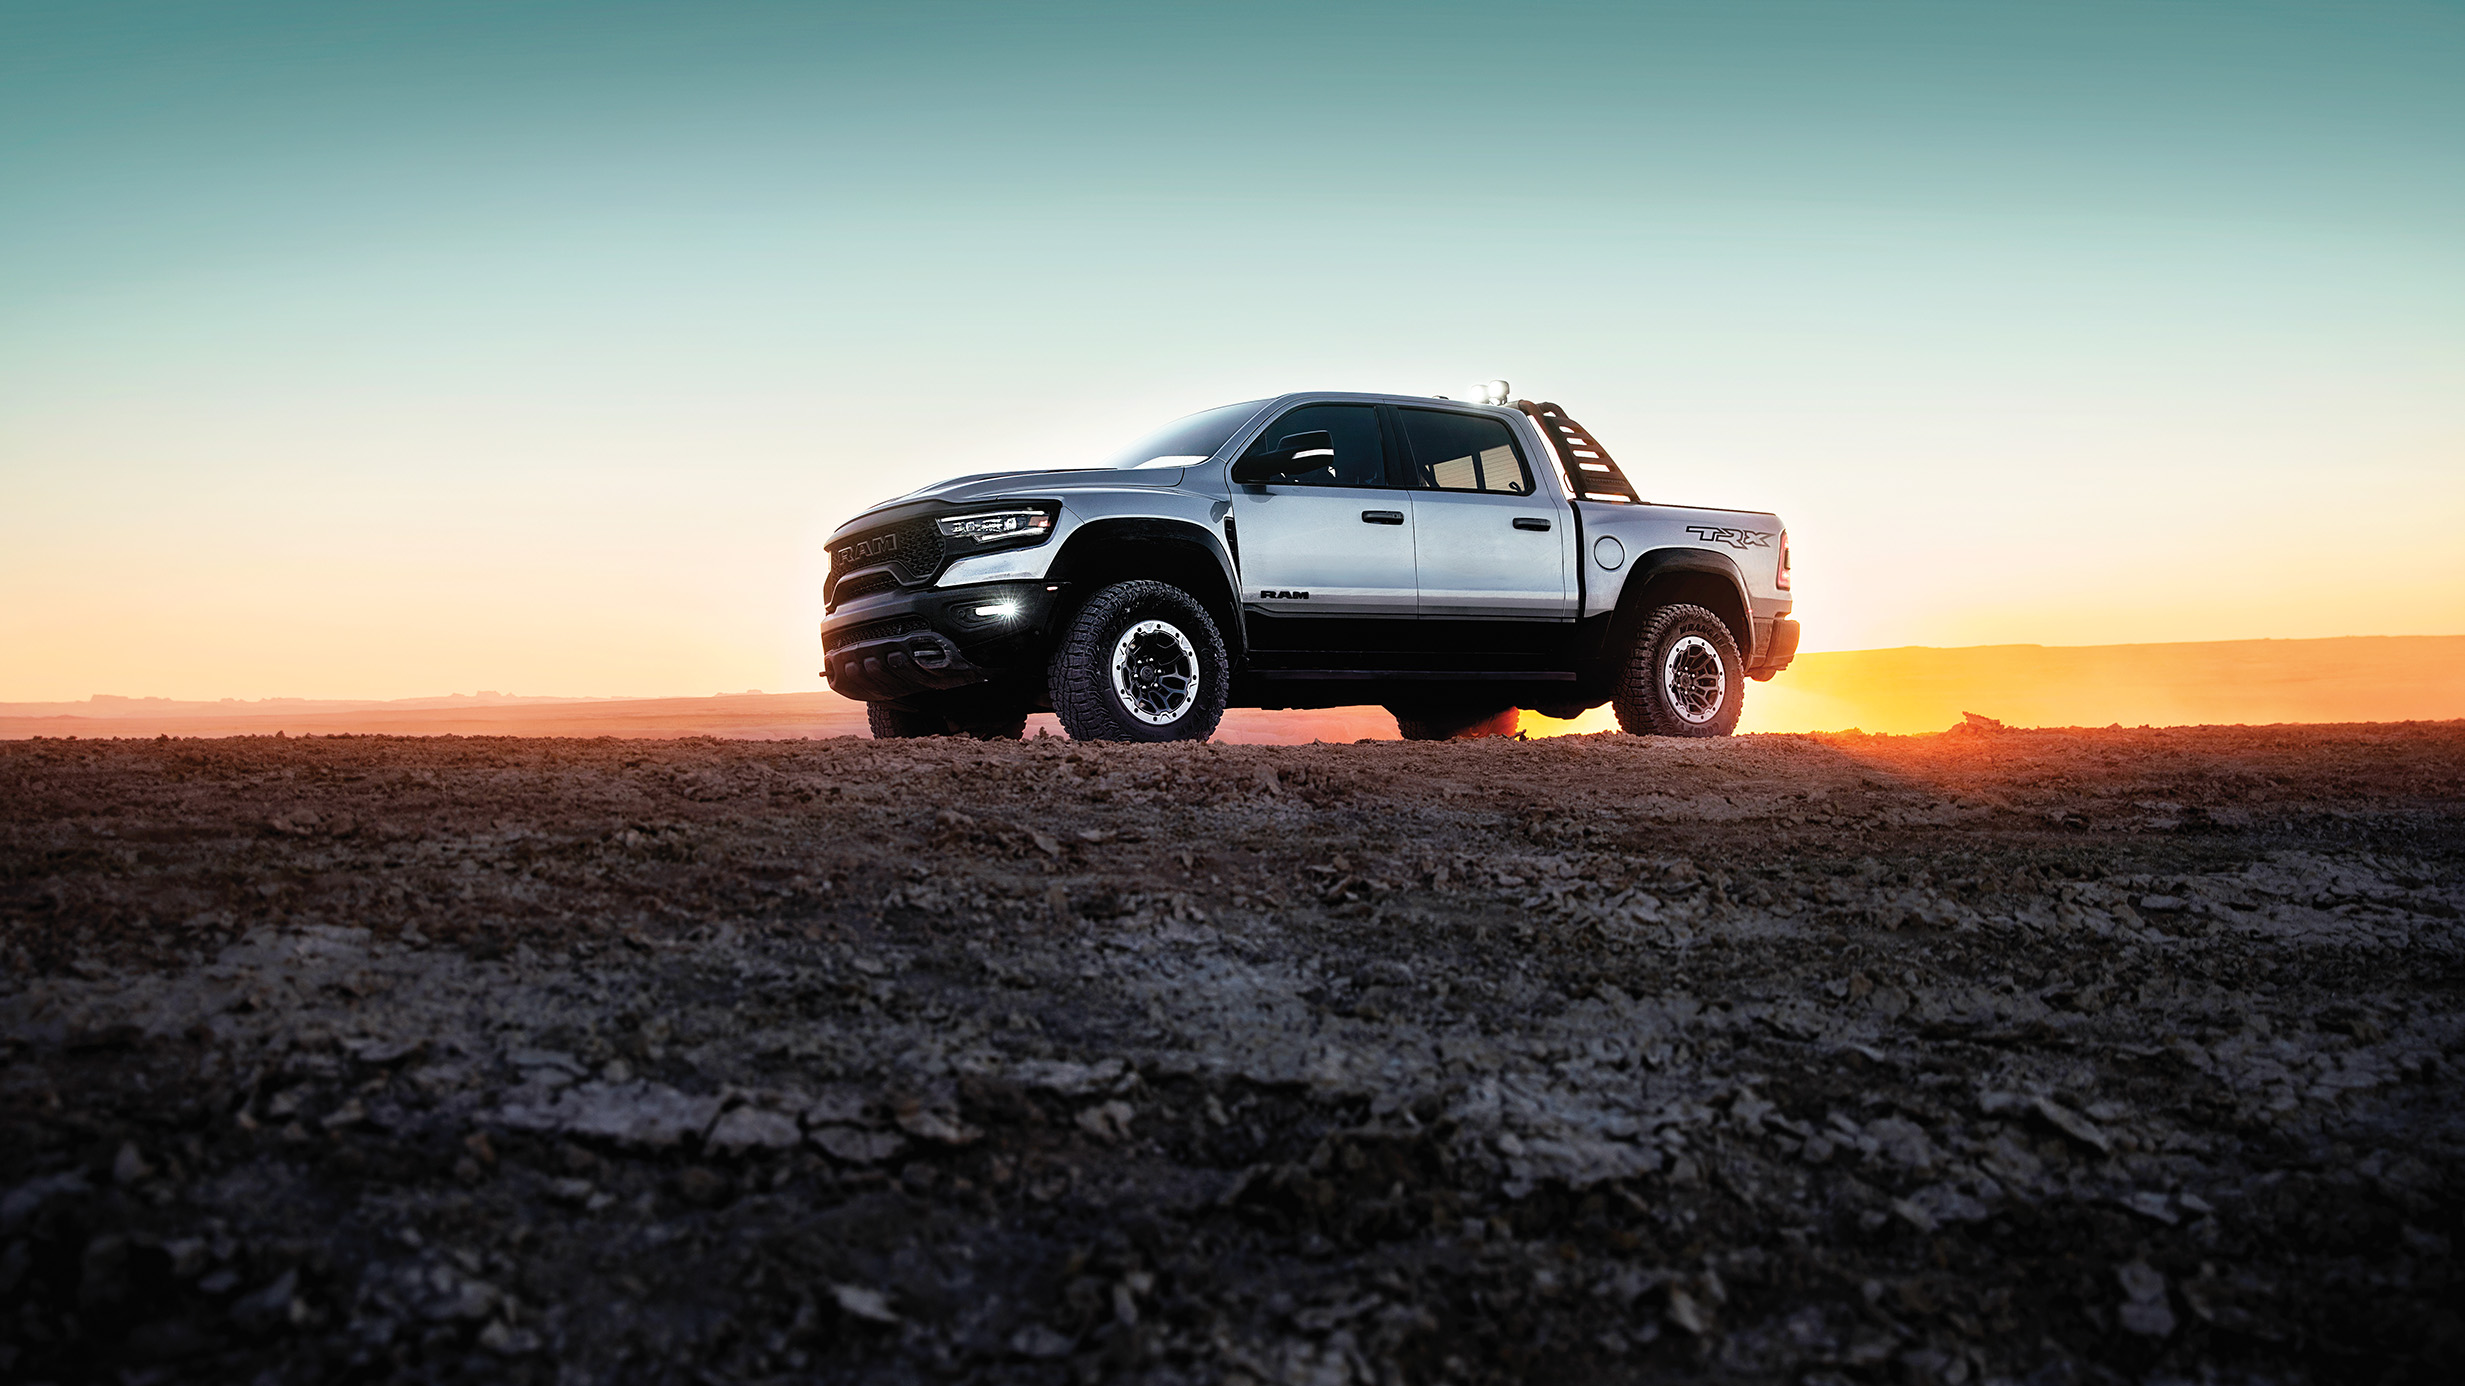 The 2023 RAM 1500 parked on the horizon, one truck that offers crew cab vs quad cab options